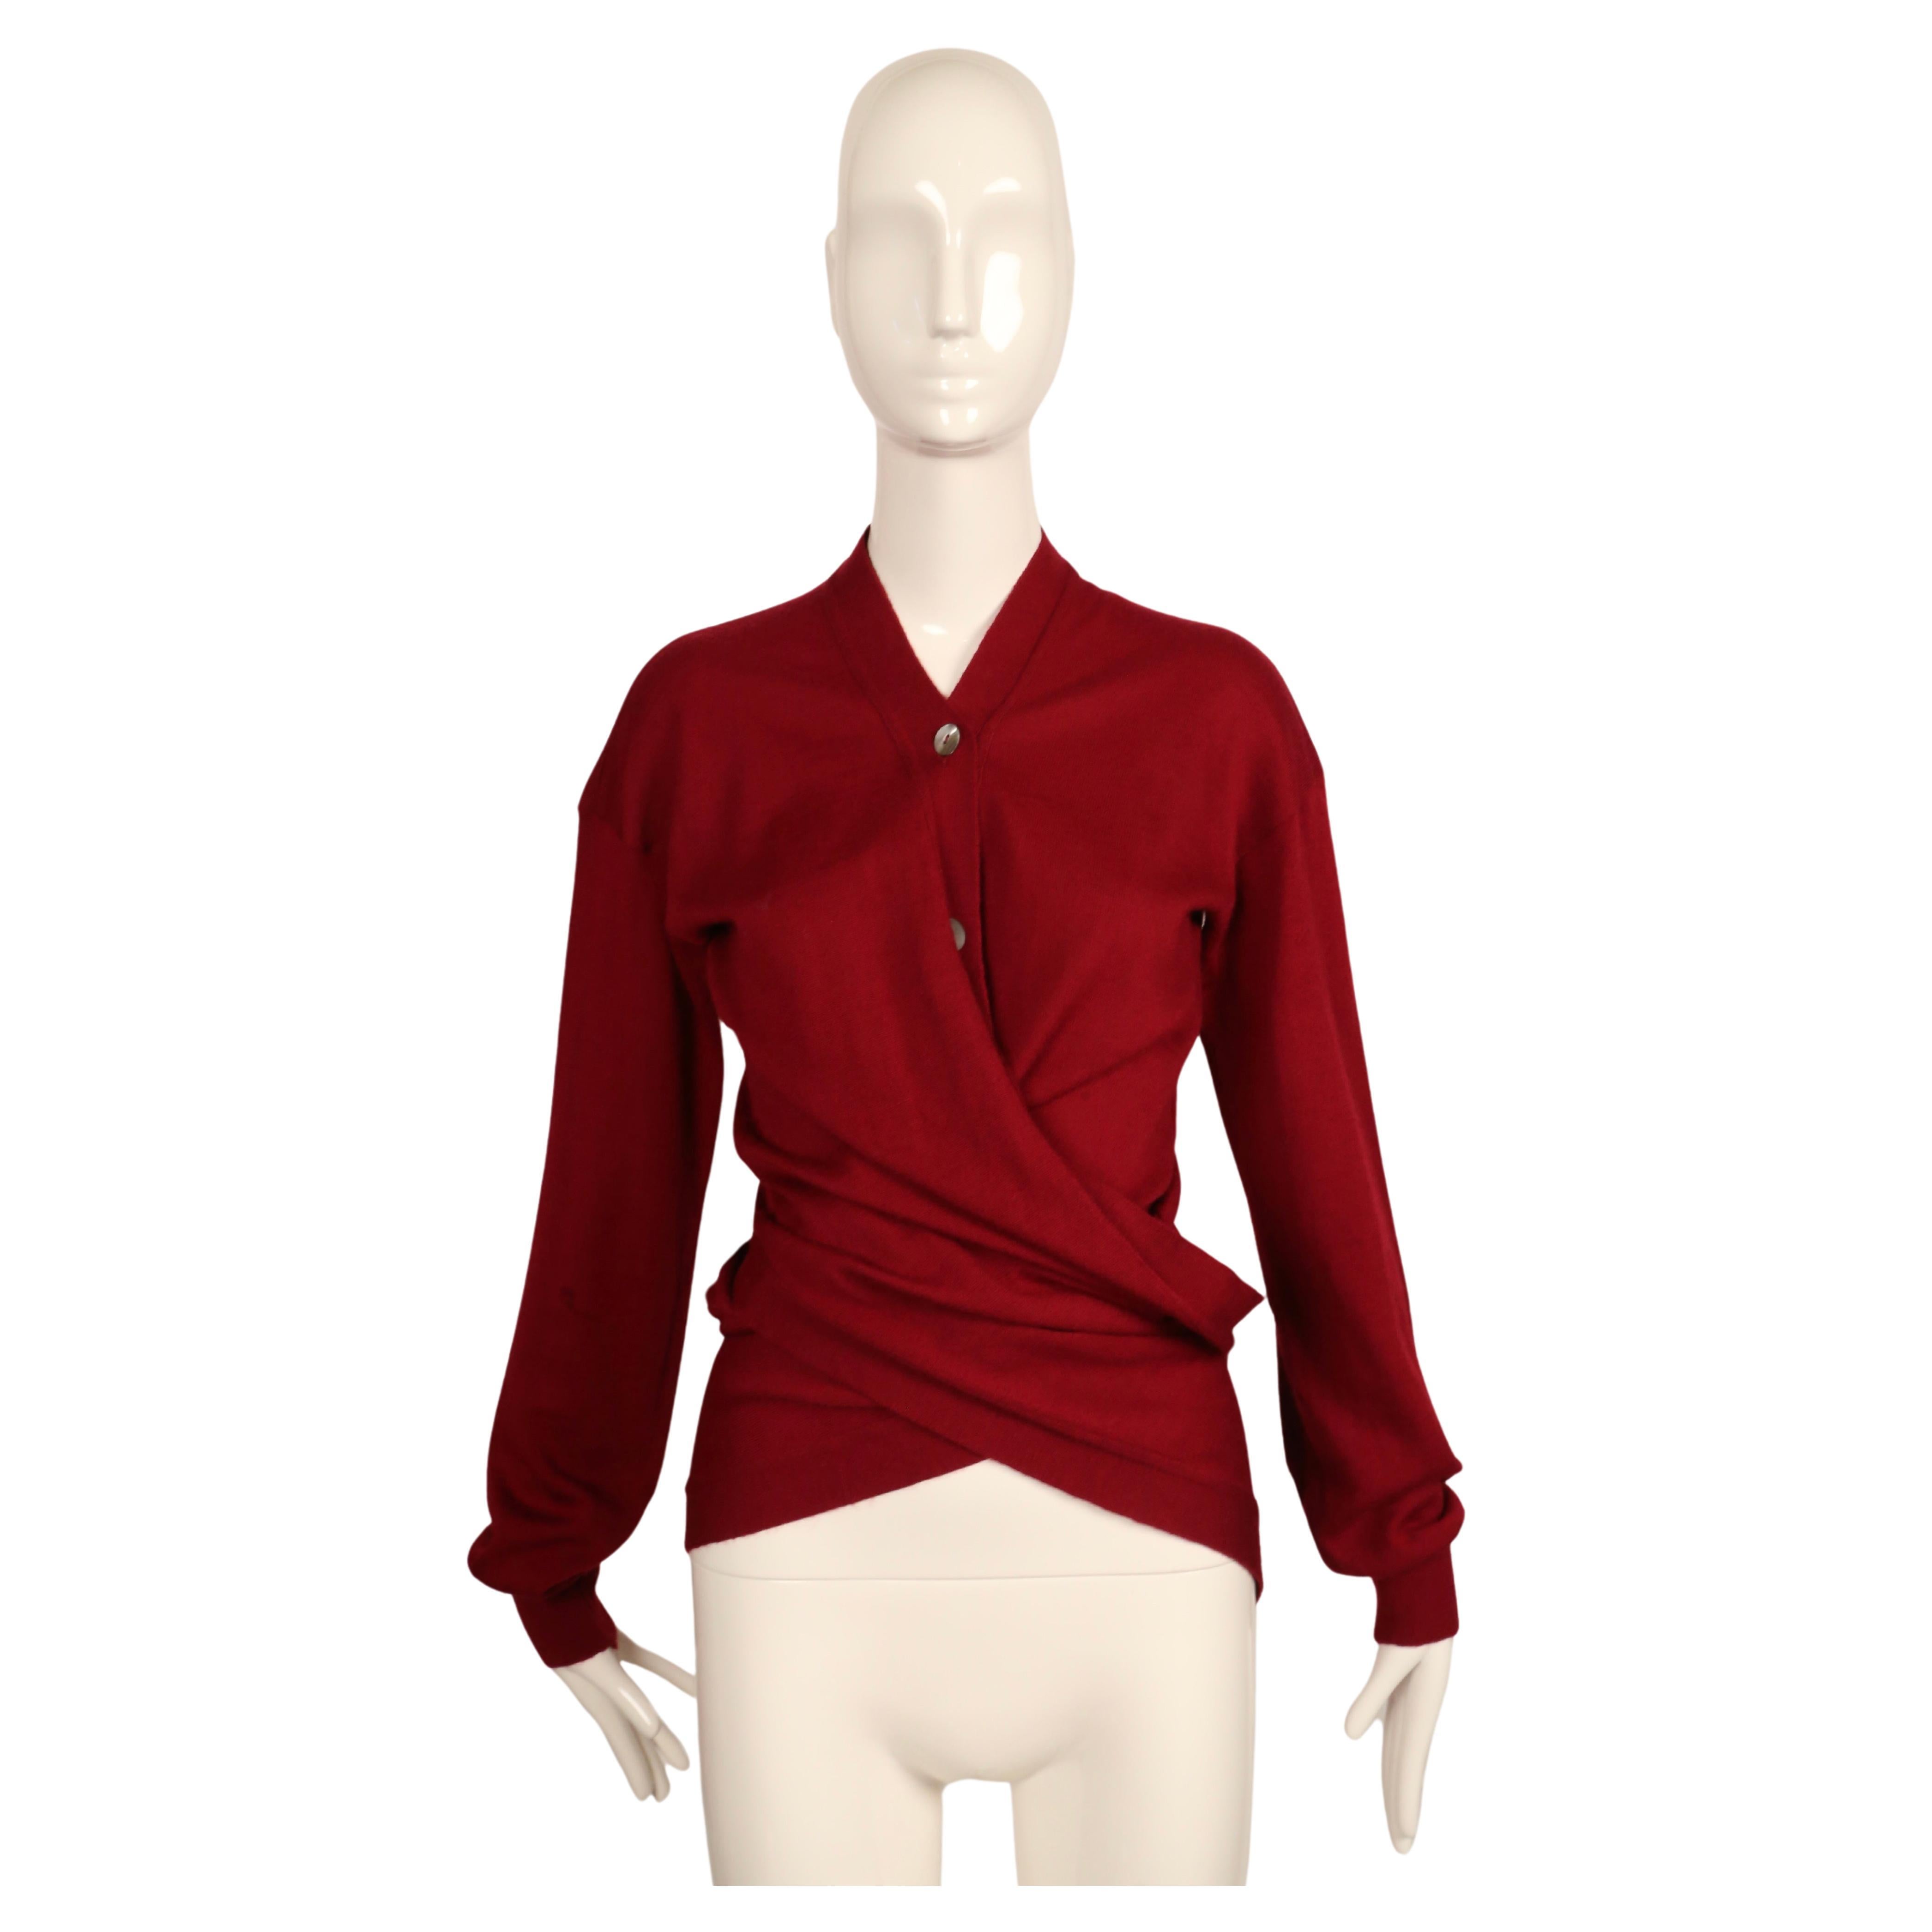 Deep cranberry wrap sweater designed by Romeo Gigli dating to approximately 1990. This piece can be found in the MET museum's costume institute archive. Labeled a size '44' however this is seems to fit a smaller size. Approximate measurements: drop